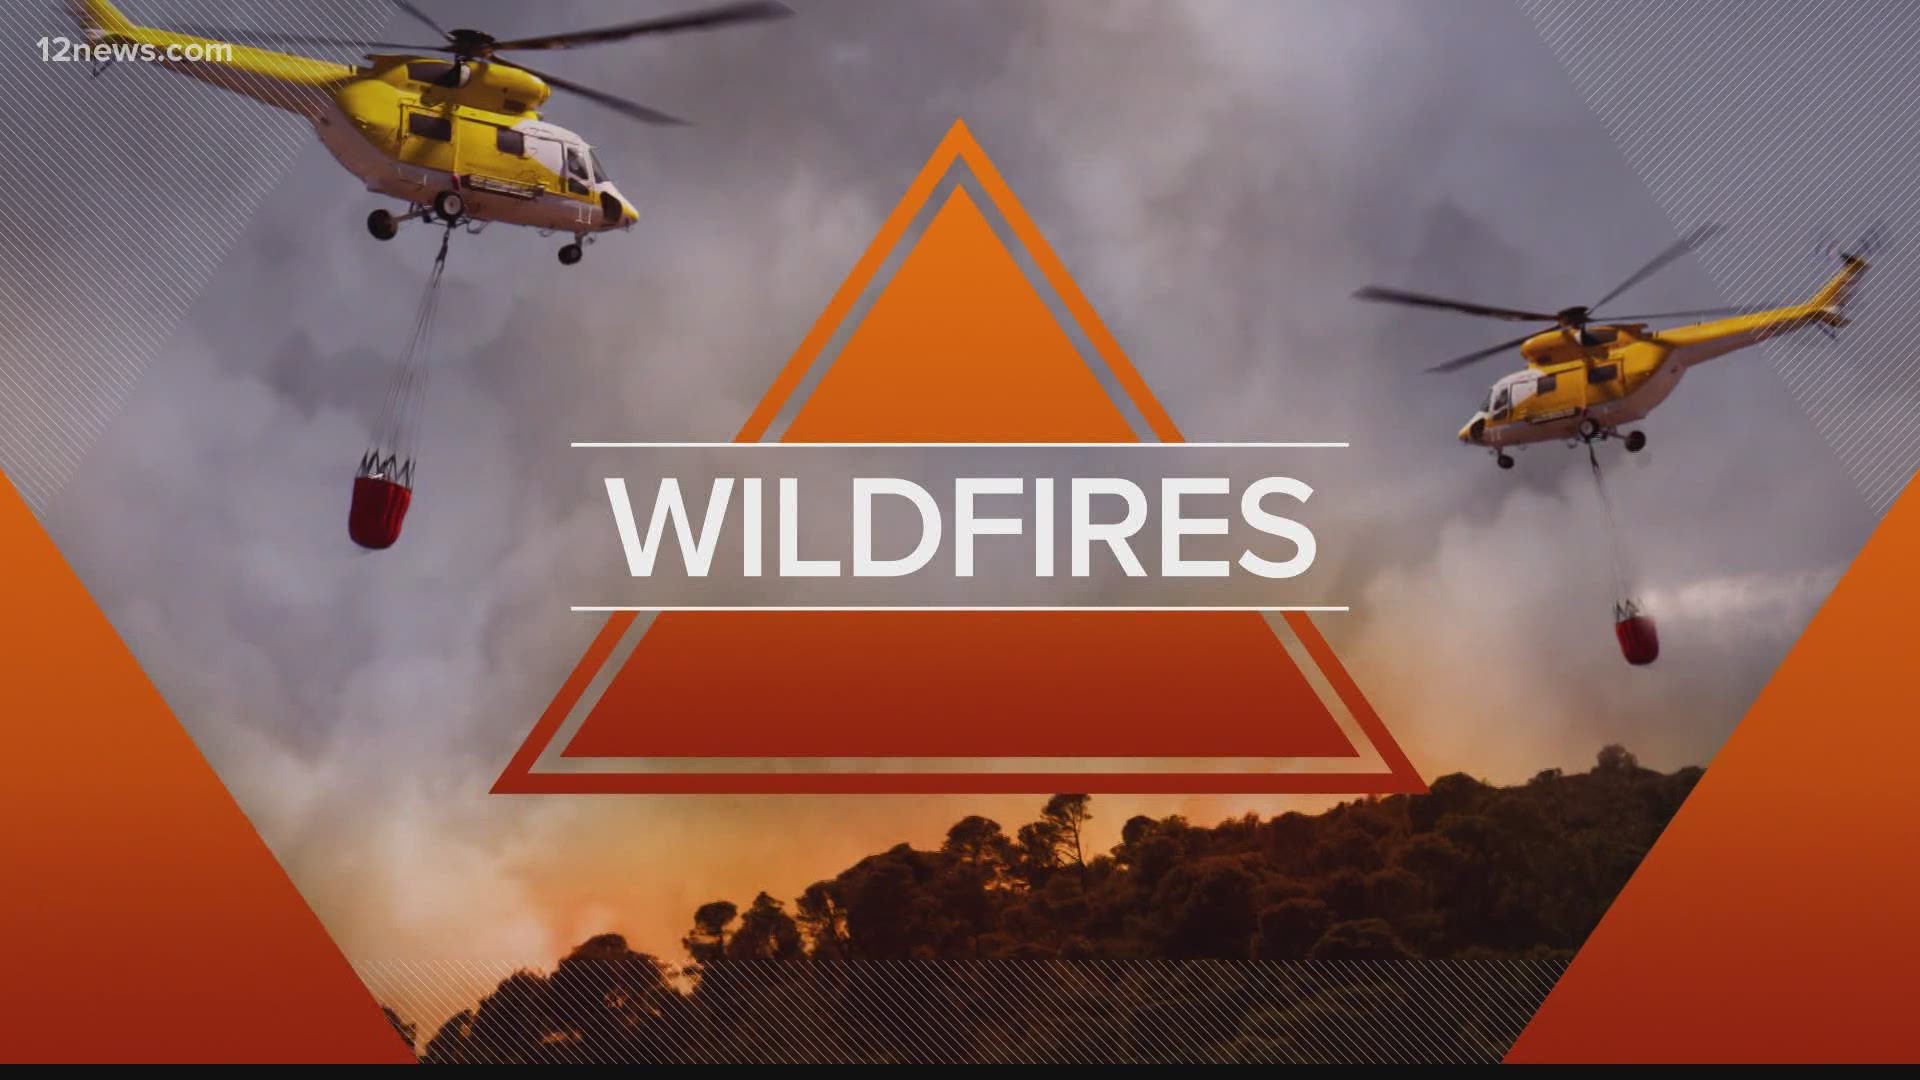 Wildfires in Arizona: July 3 morning update